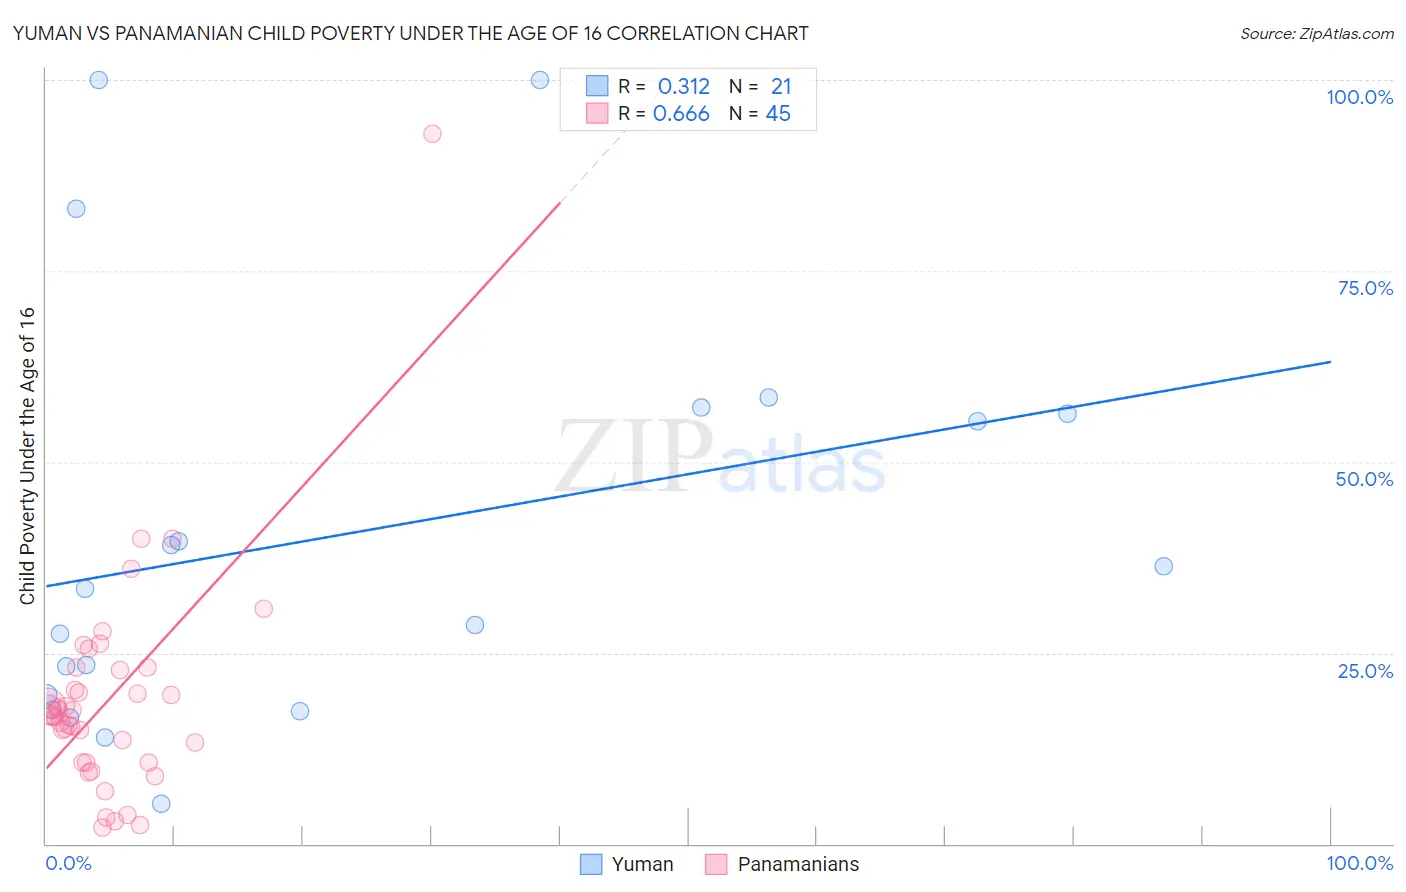 Yuman vs Panamanian Child Poverty Under the Age of 16